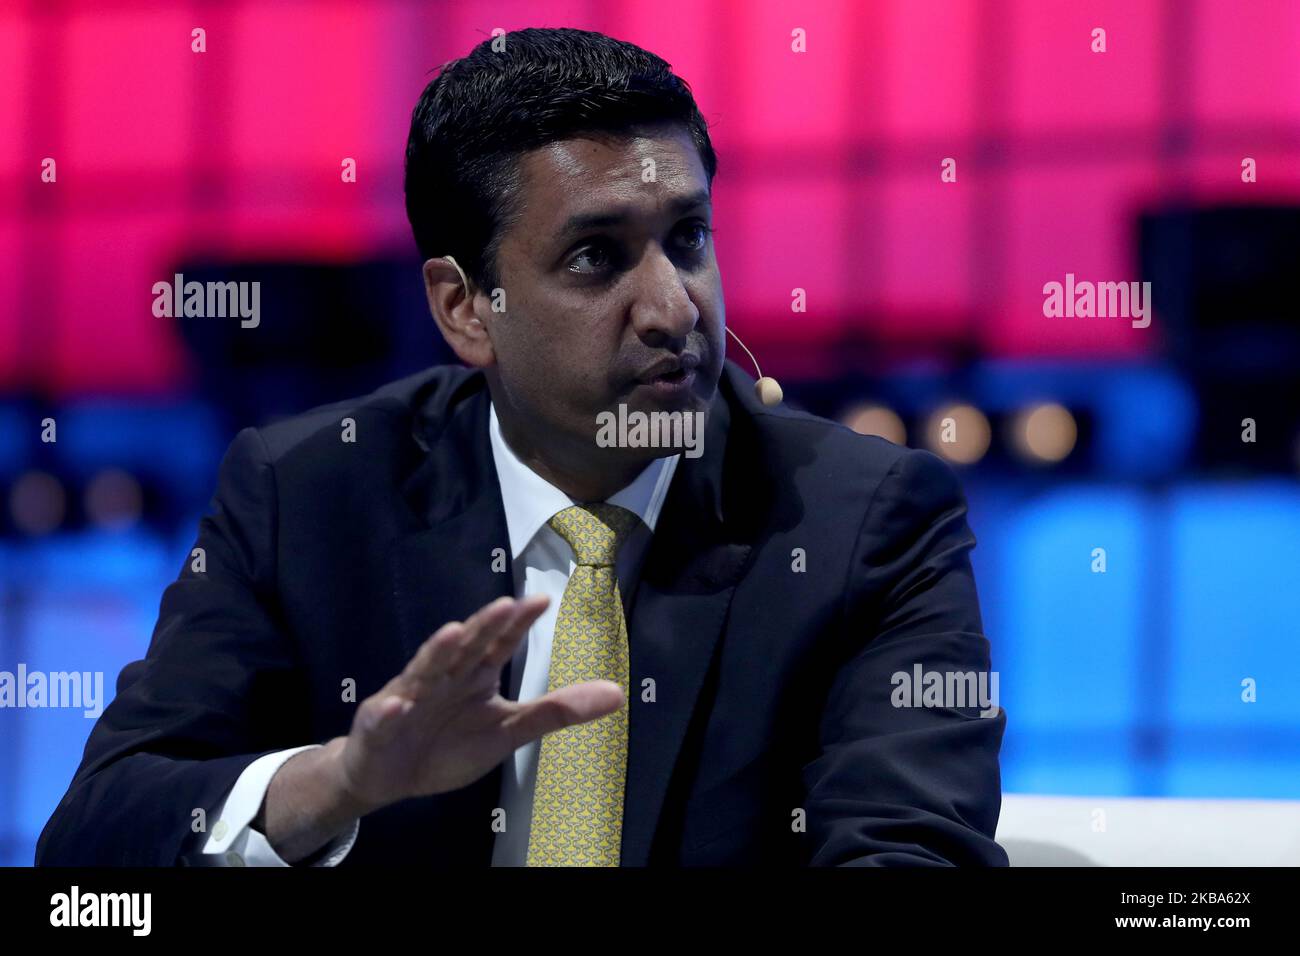 House of Representatives Representative Ro Khanna speaks during the annual Web Summit technology conference in Lisbon, Portugal on November 6, 2019. (Photo by Pedro FiÃºza/NurPhoto) Stock Photo